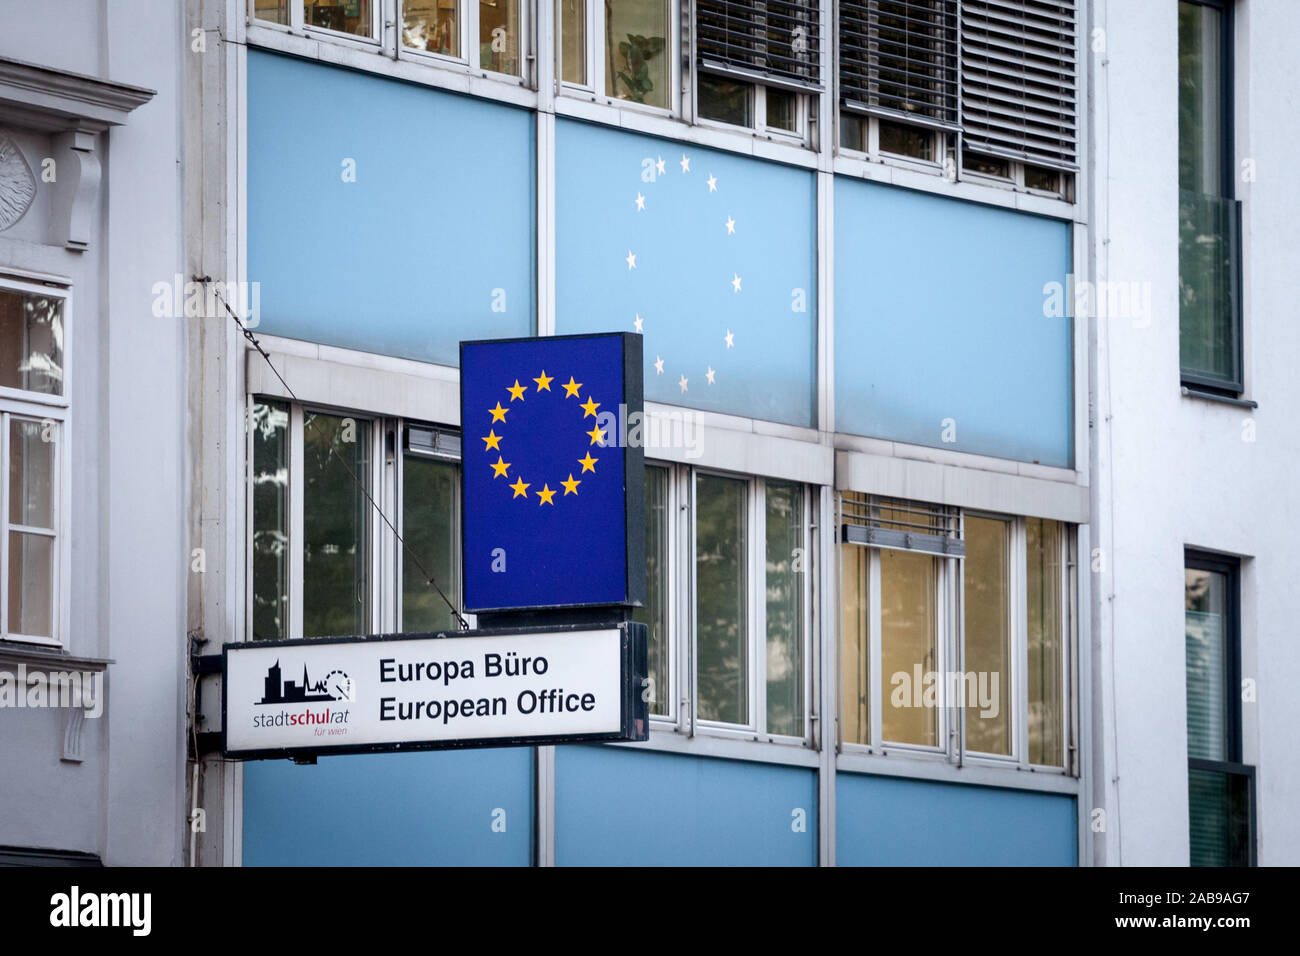 VIENNA, AUSTRIA - NOVEMBER 6, 2019: European Office of Vienna, also called Europa Buro, in the center of Vienna. It is aimed at sensibilizing people t Stock Photo